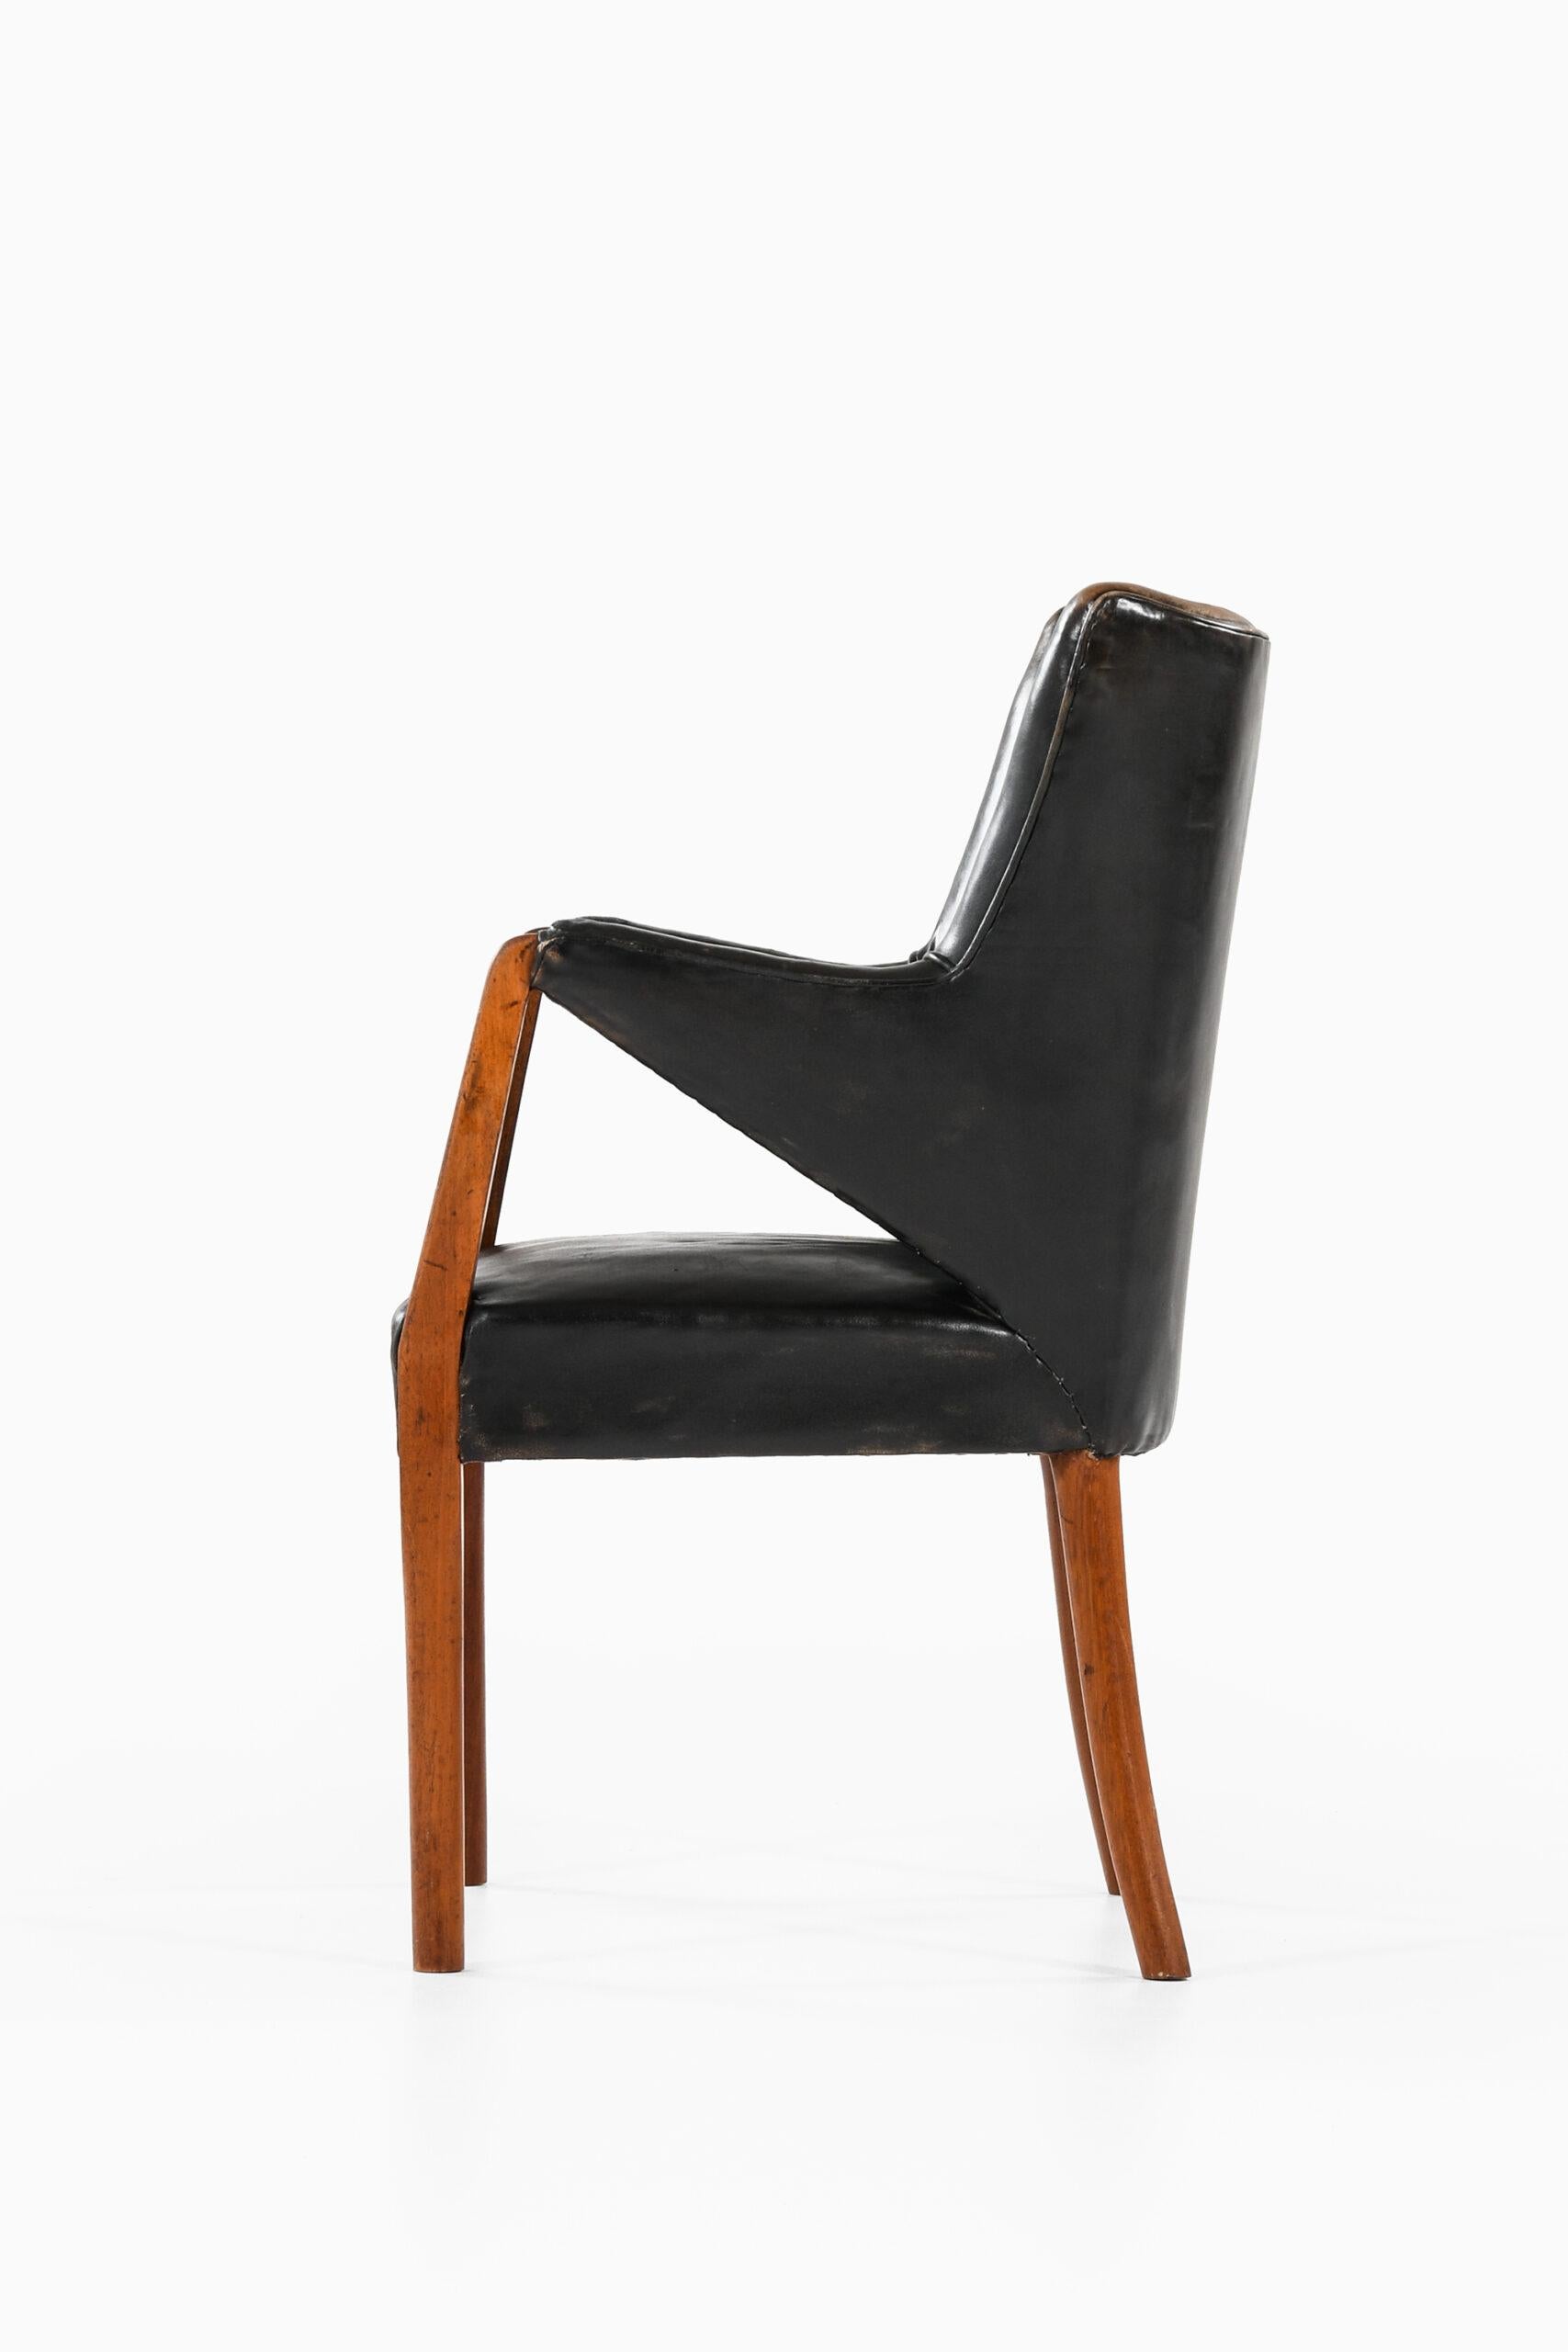 Mid-20th Century Armchair Attributed to Peter Hvidt & Orla Mølgaard-Nielsen For Sale